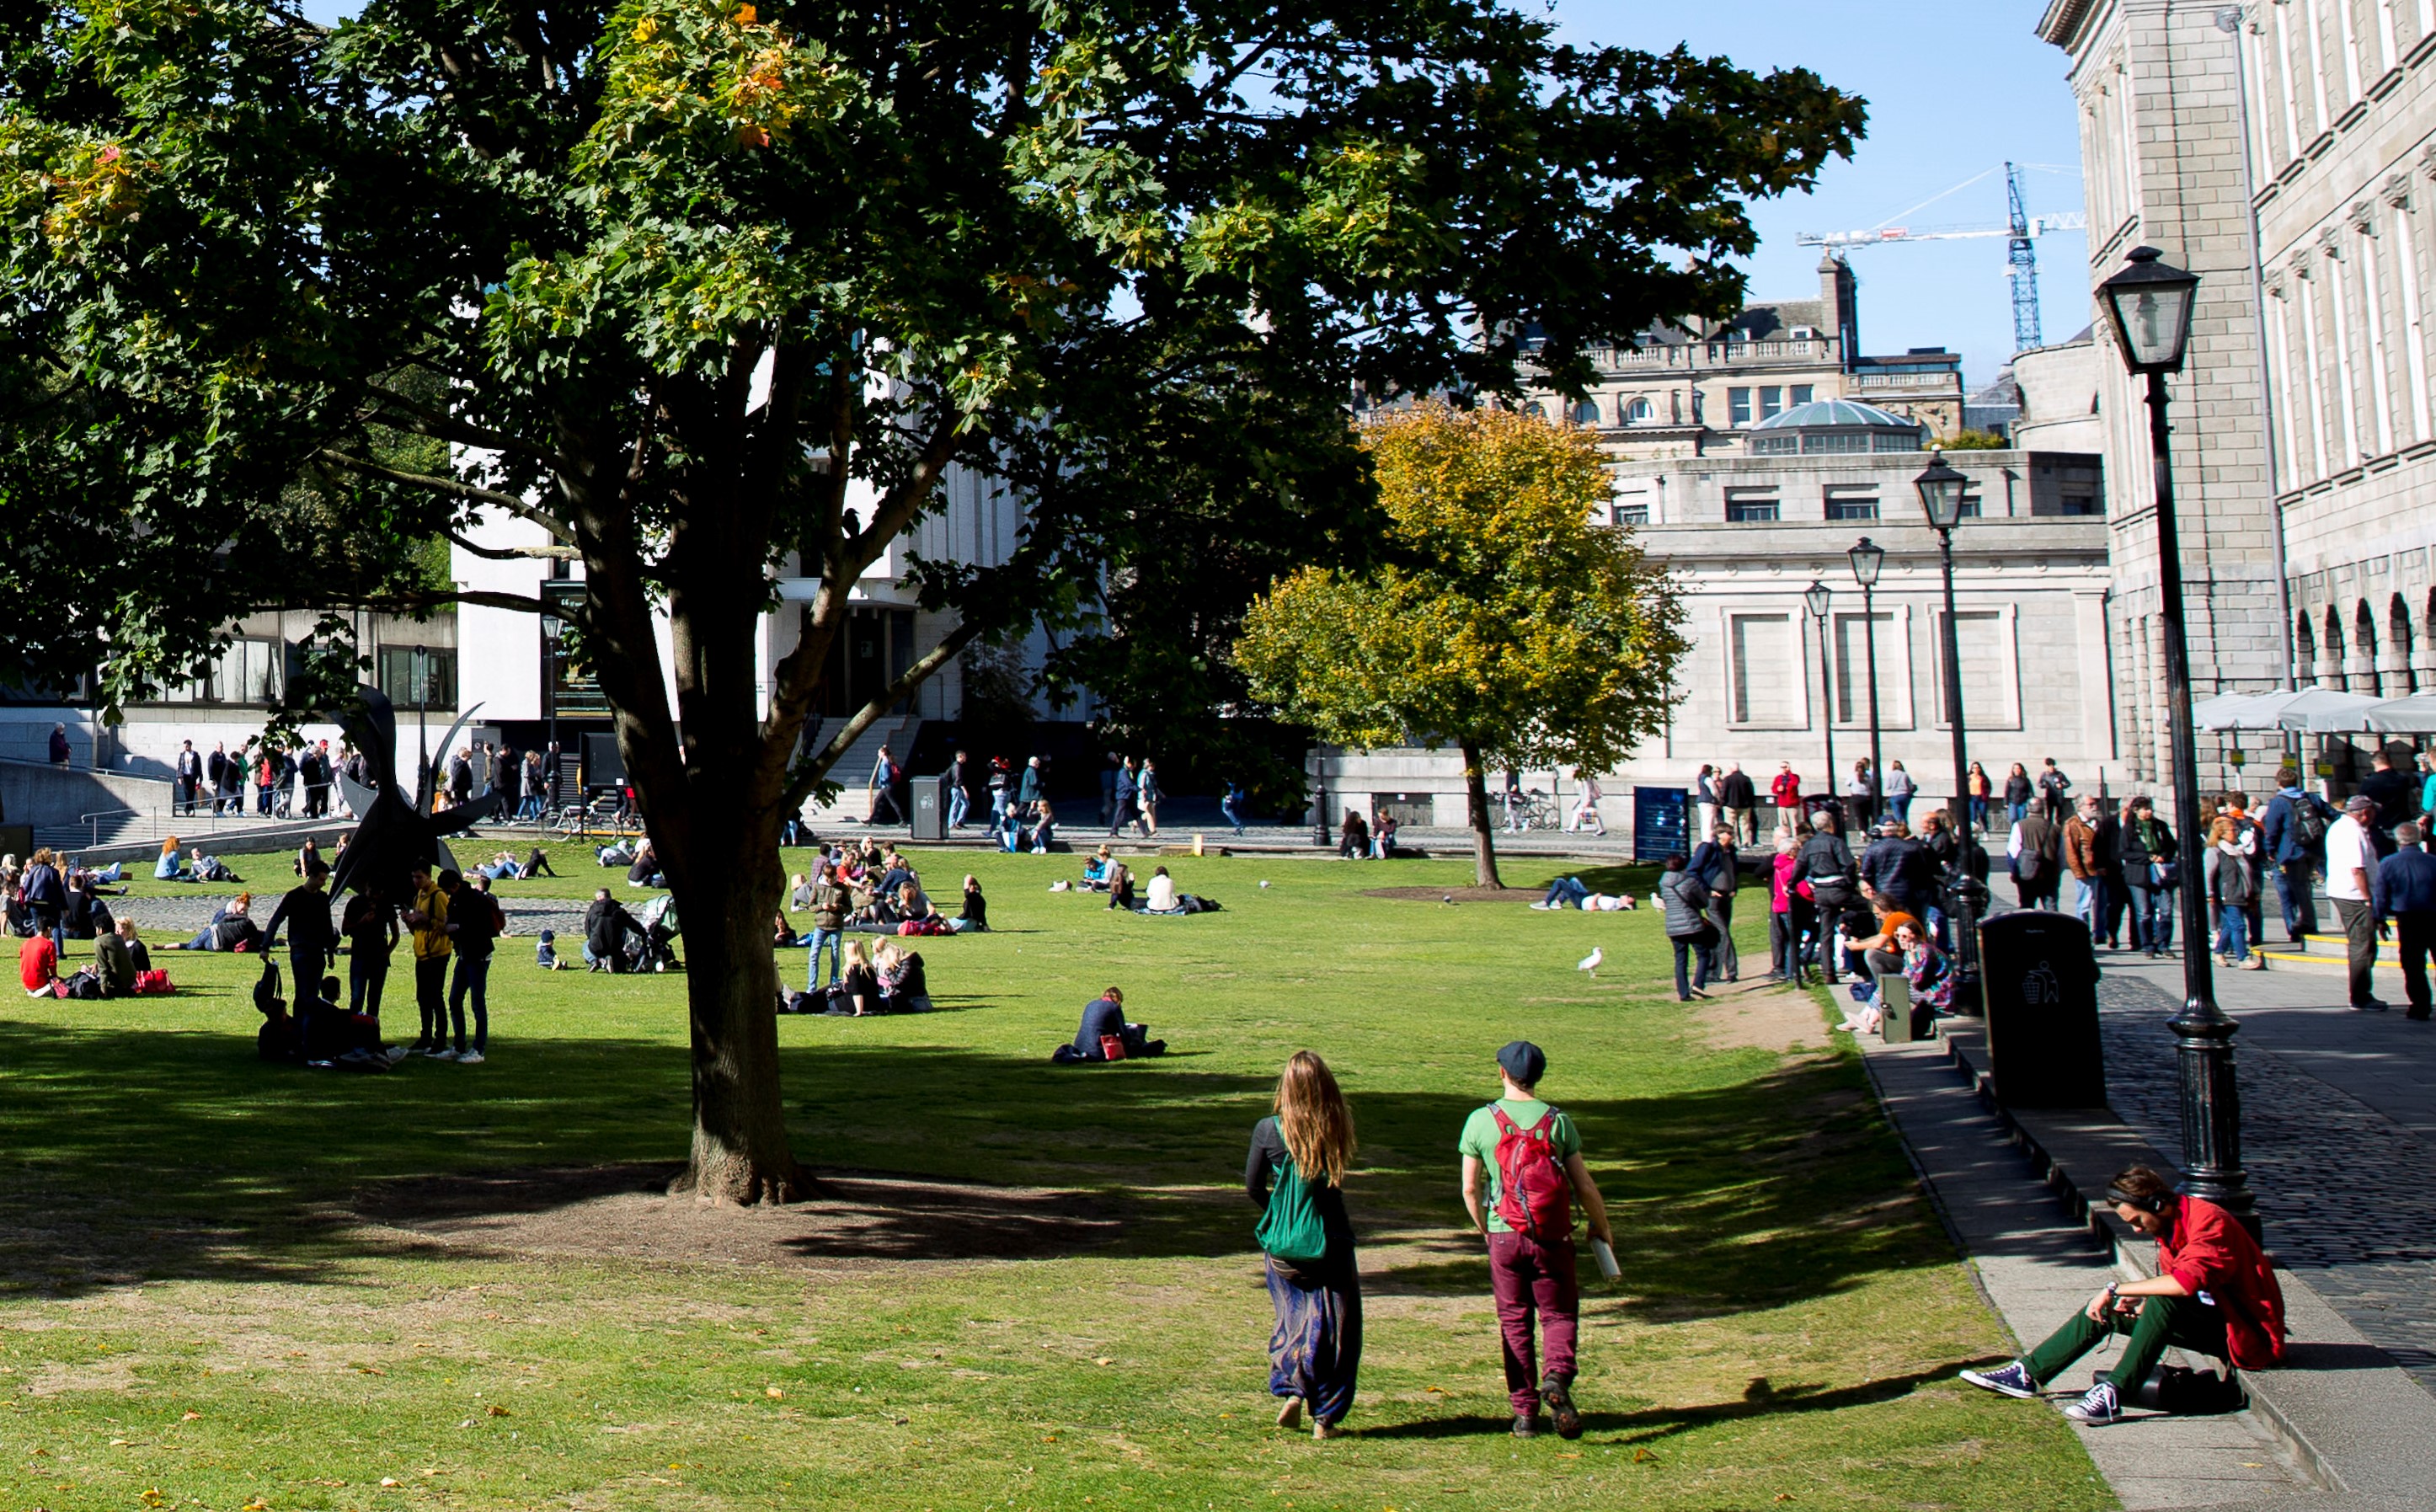 Photo showing the fellows' square of Trinity College Dublin. No building in particular is focused on